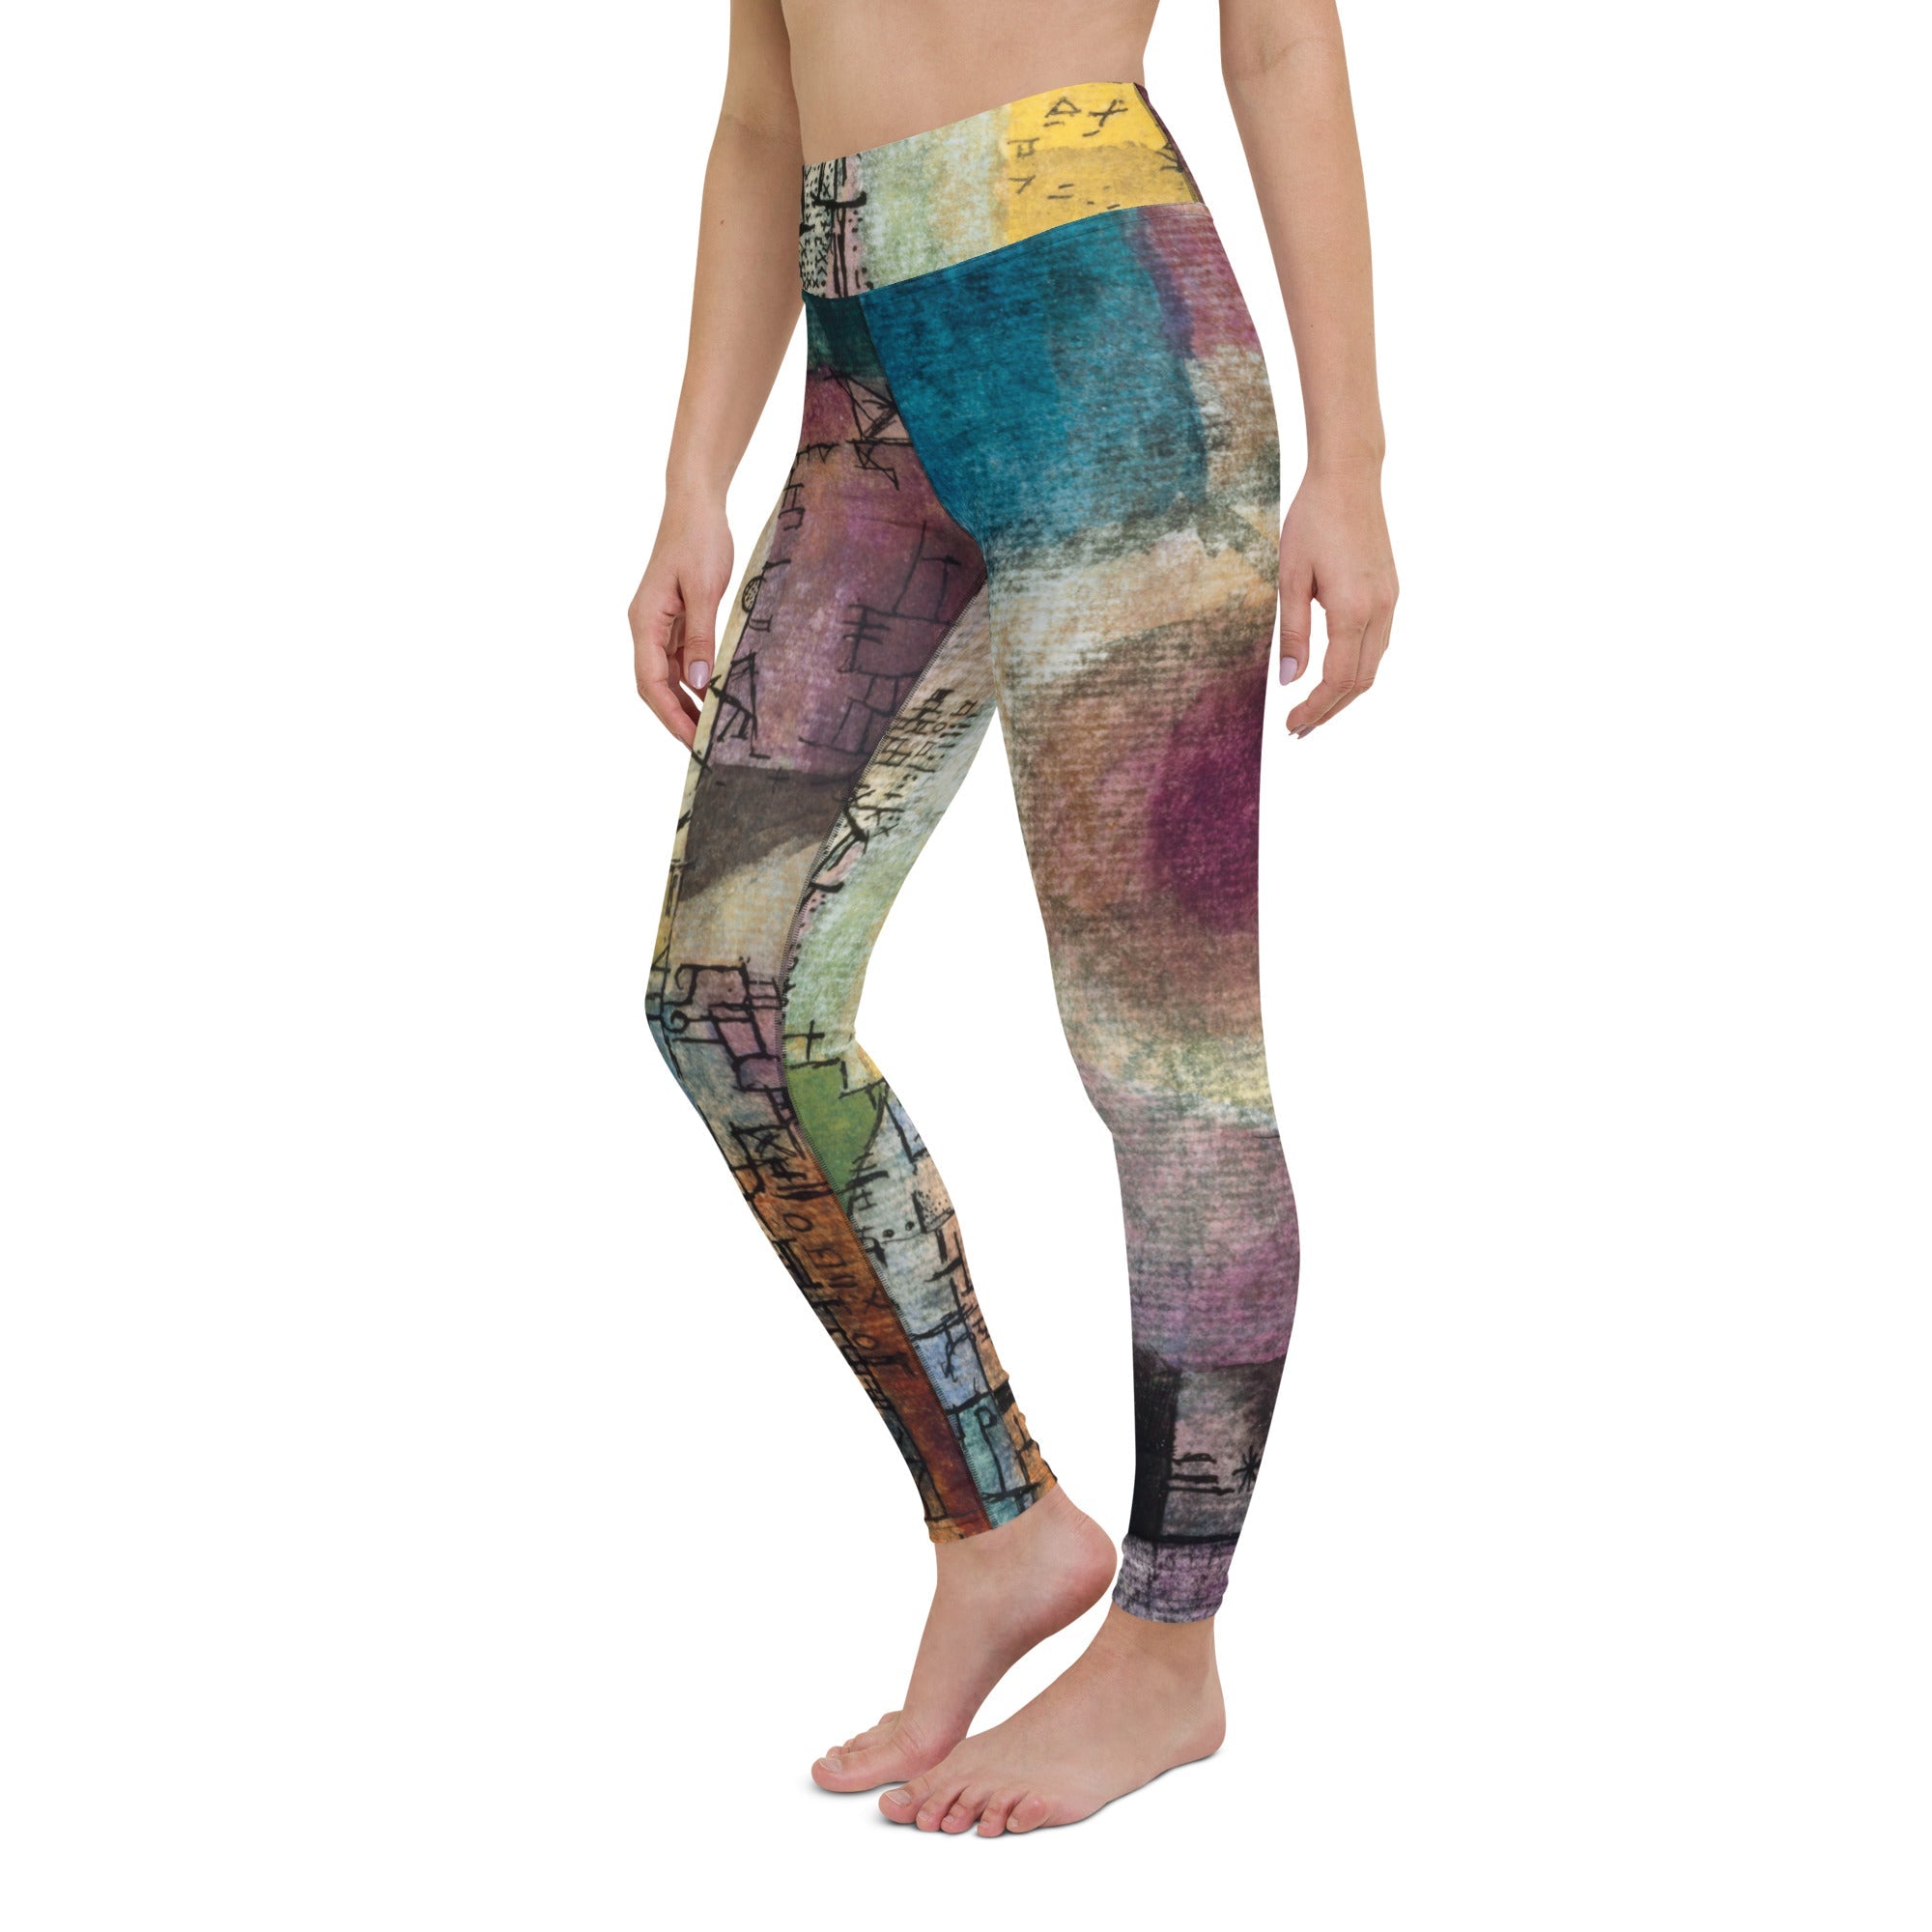 RELAX High Rise Leggings- Klee's Abstract Illusion – Relax